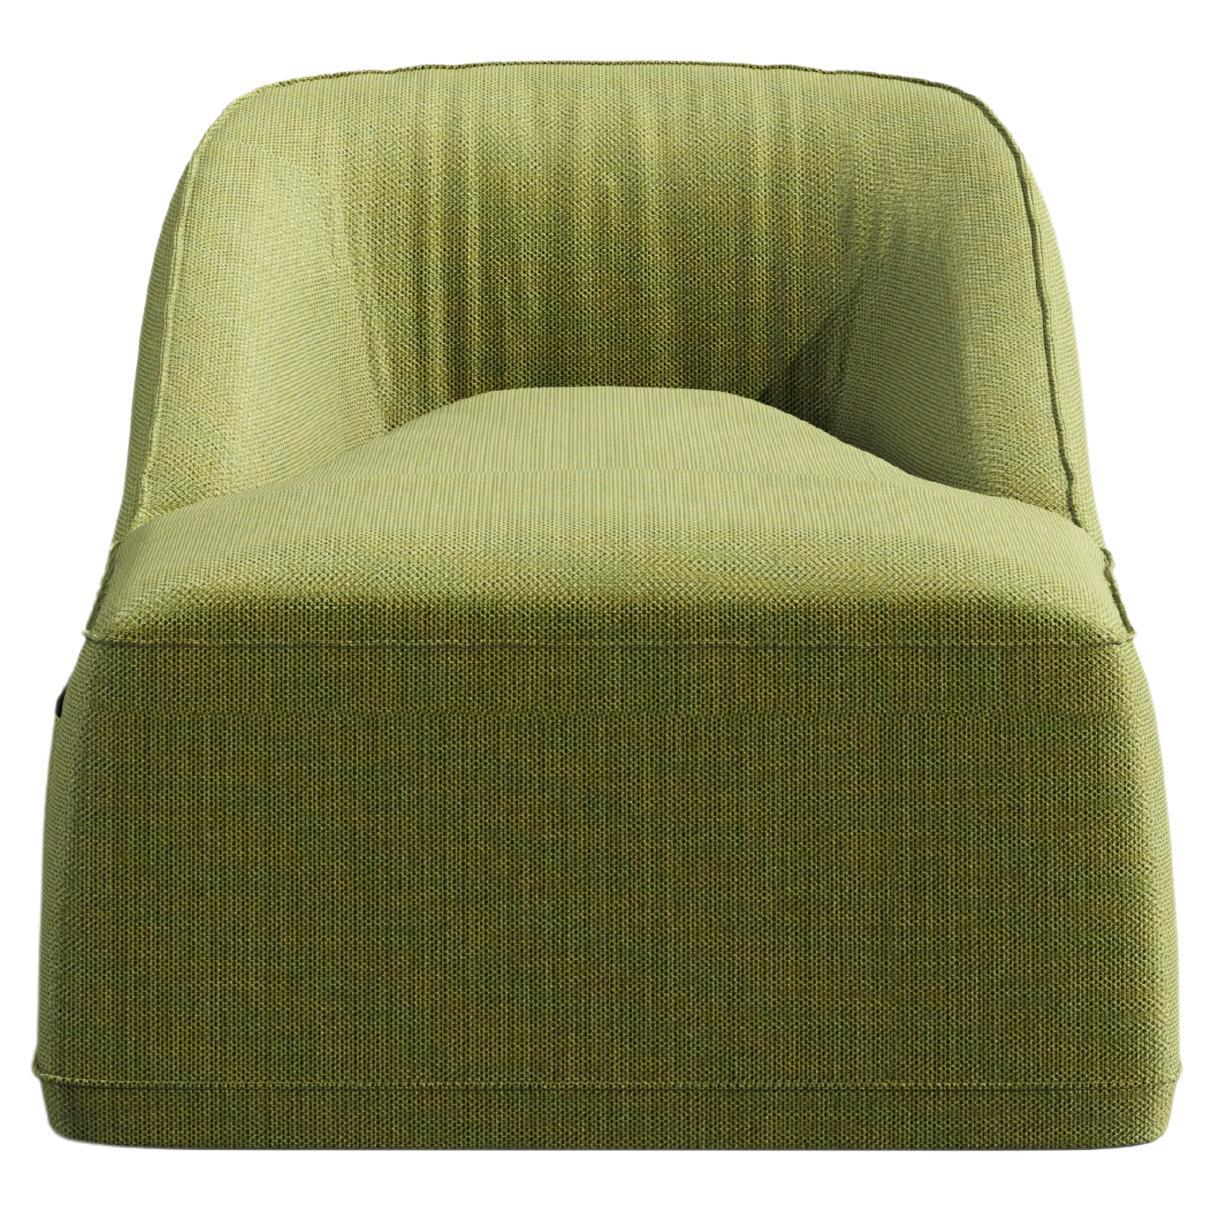 Modern Outdoor Chair with Weather-Resistant Sunbrella Fabric Upholstery in Green